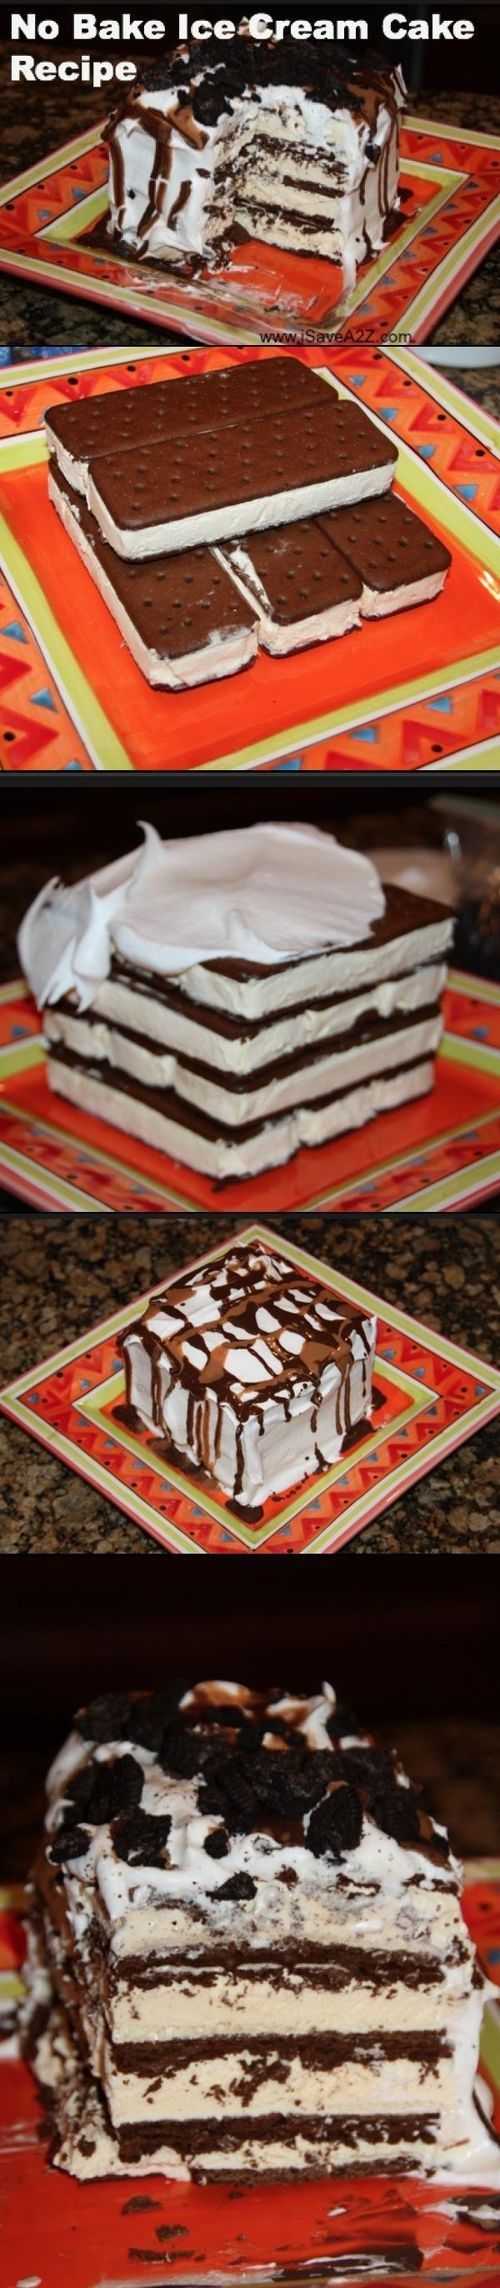 DIY No Bake Ice Cream Cake Pictures, Photos, and Images for Facebook, Tumblr, Pi